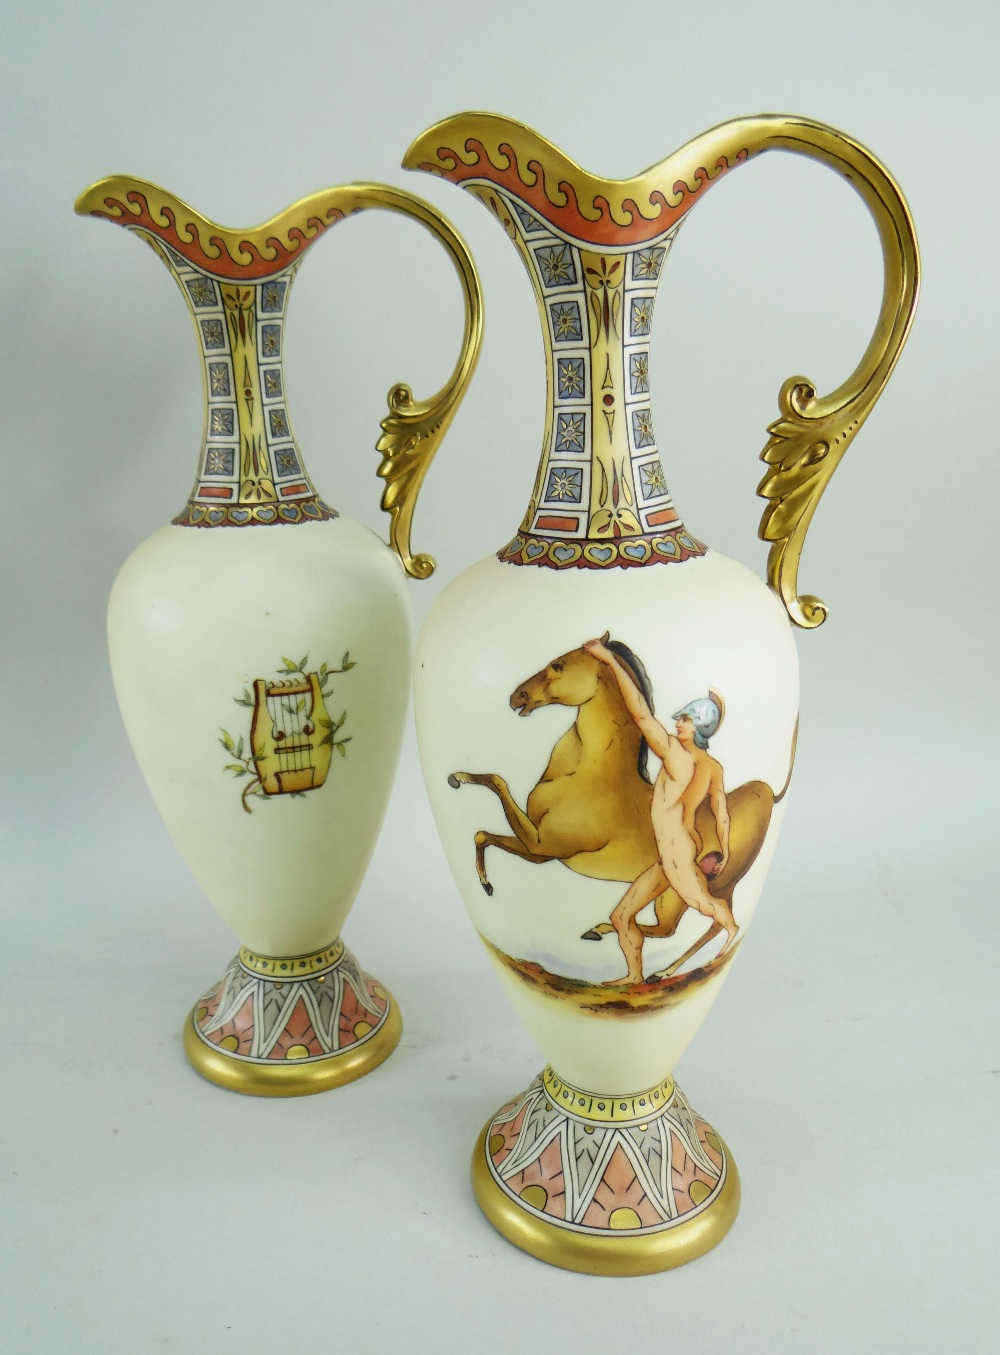 PAIR RUDOLSTADT (LAZARUS STRAUSS & SONS) PORCELAIN EWERS, CIRCA 1910, of neo-classical style,